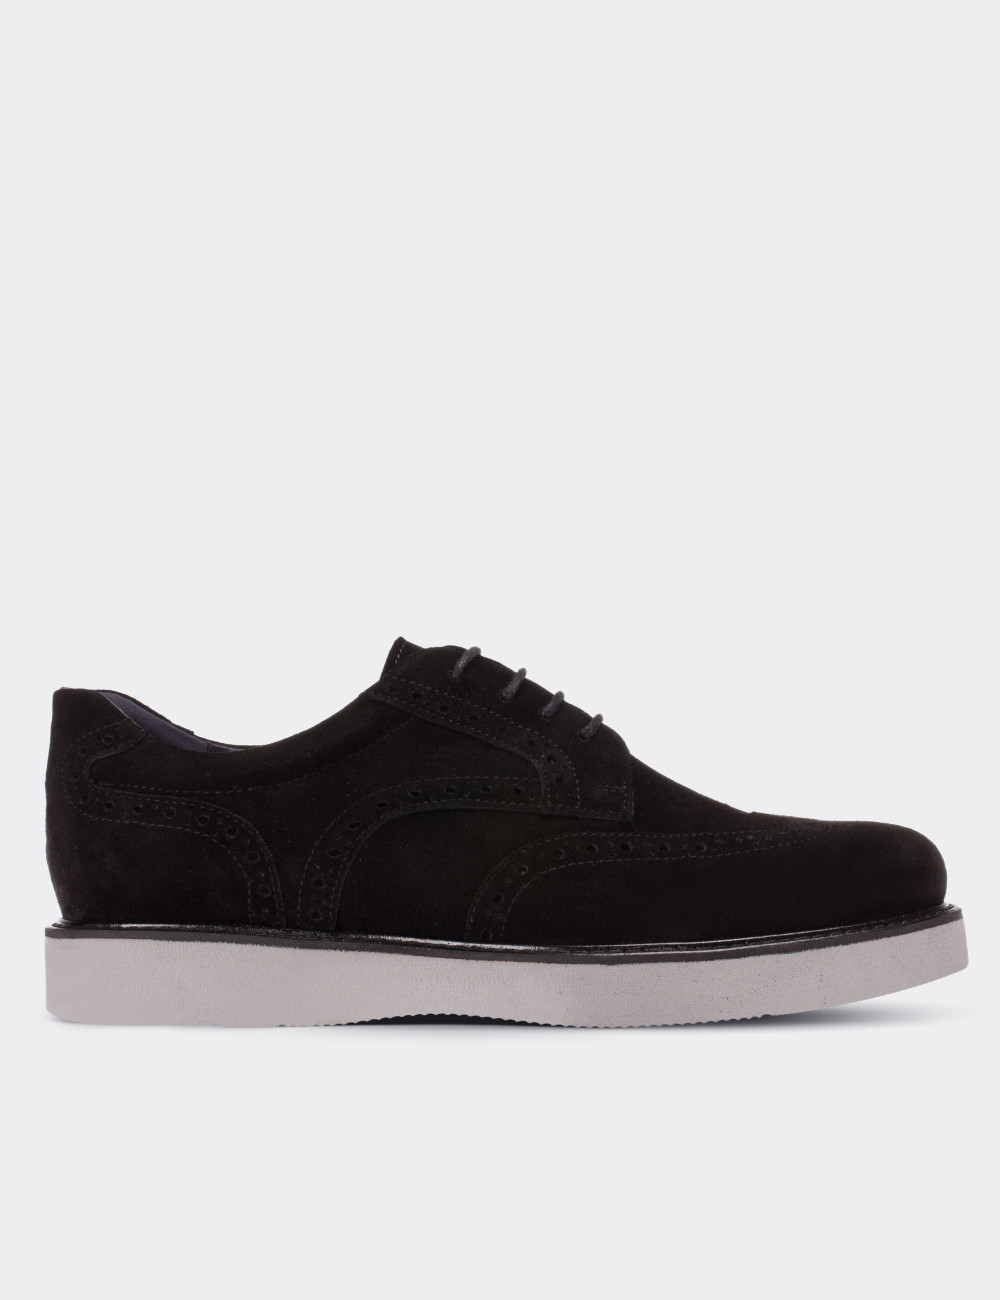 Black Suede Leather Lace-up Shoes - 01691MSYHE01